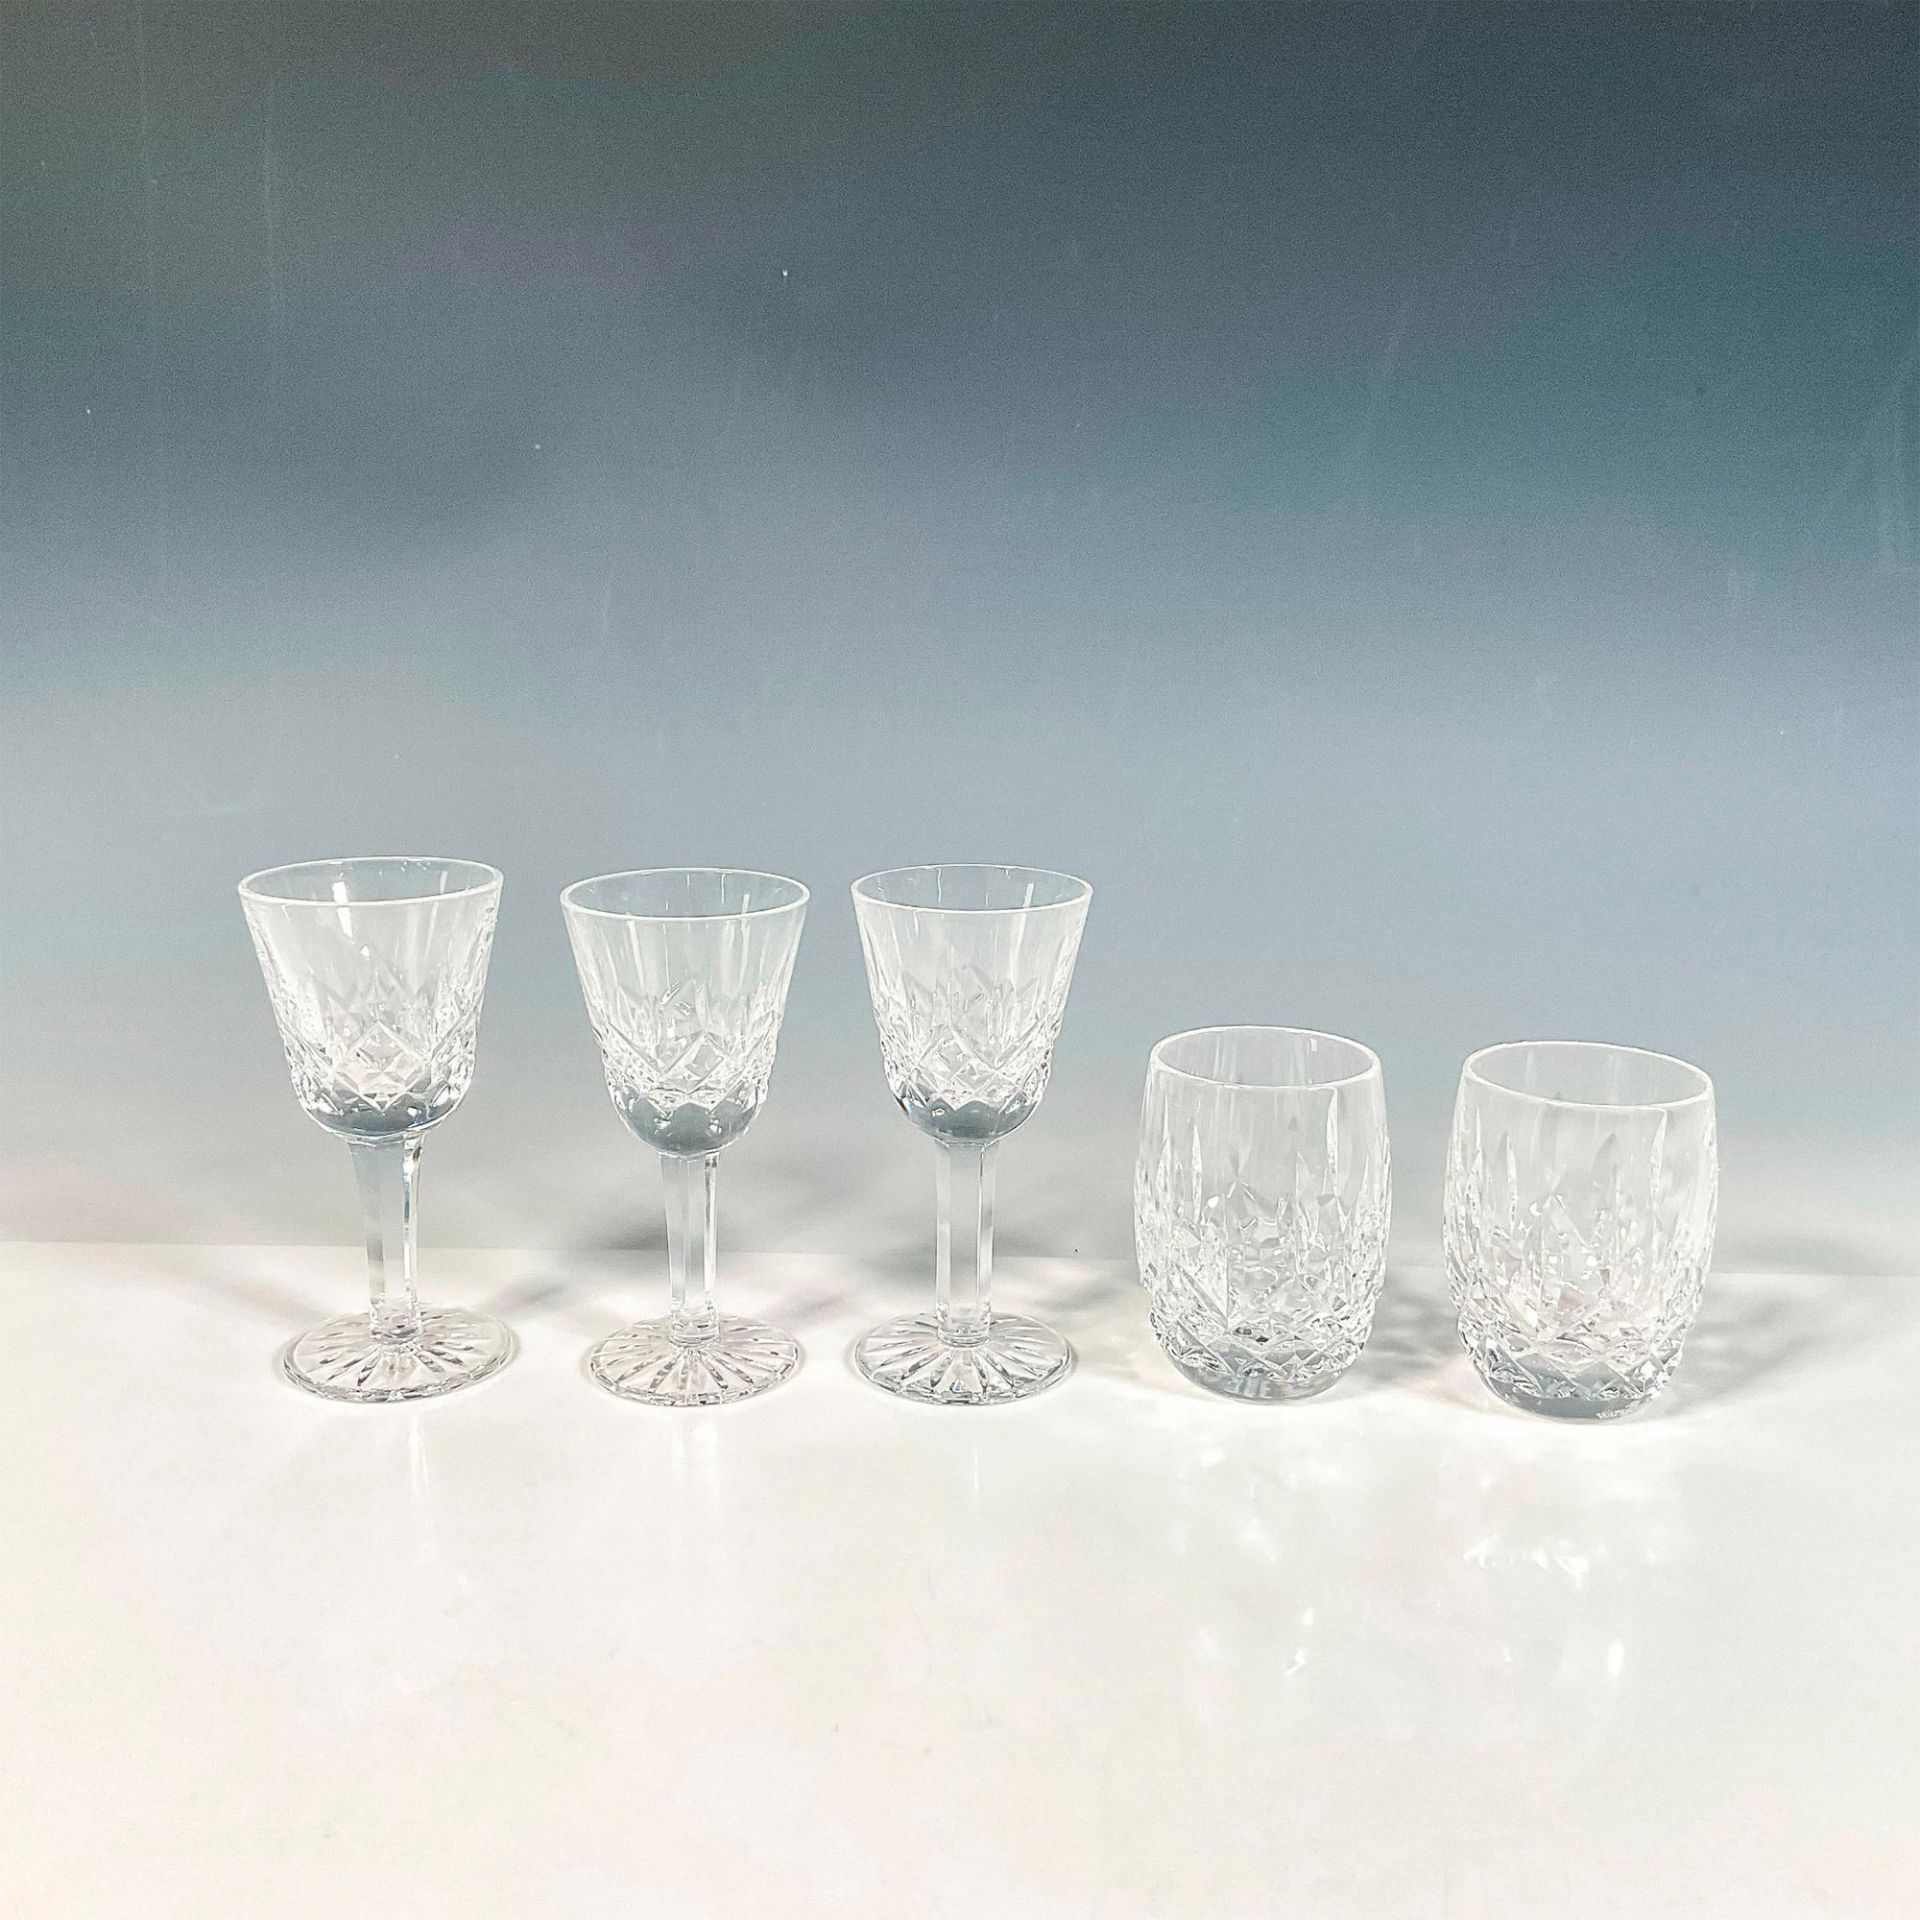 5pc Waterford Crystal Cordial & Shot Glasses, Lismore